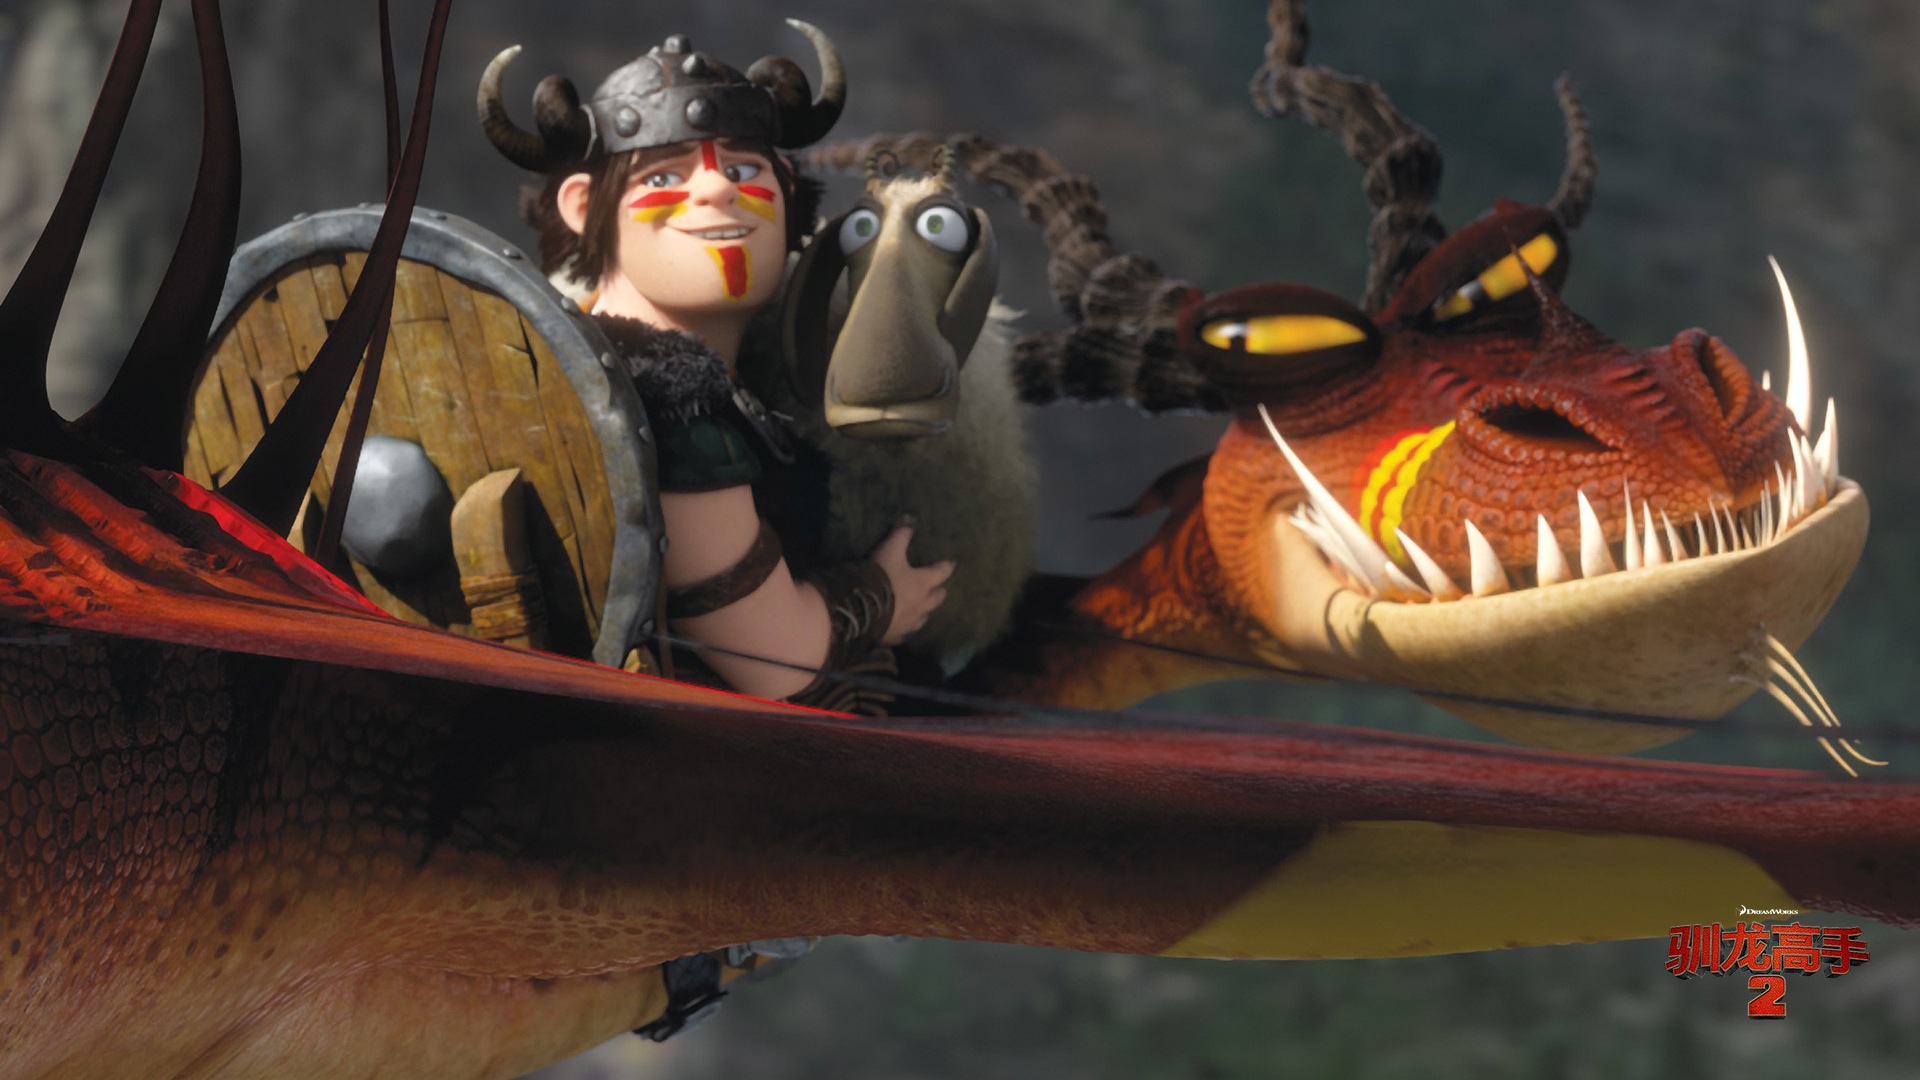 How to Train Your Dragon 2 HD wallpapers #7 - 1920x1080